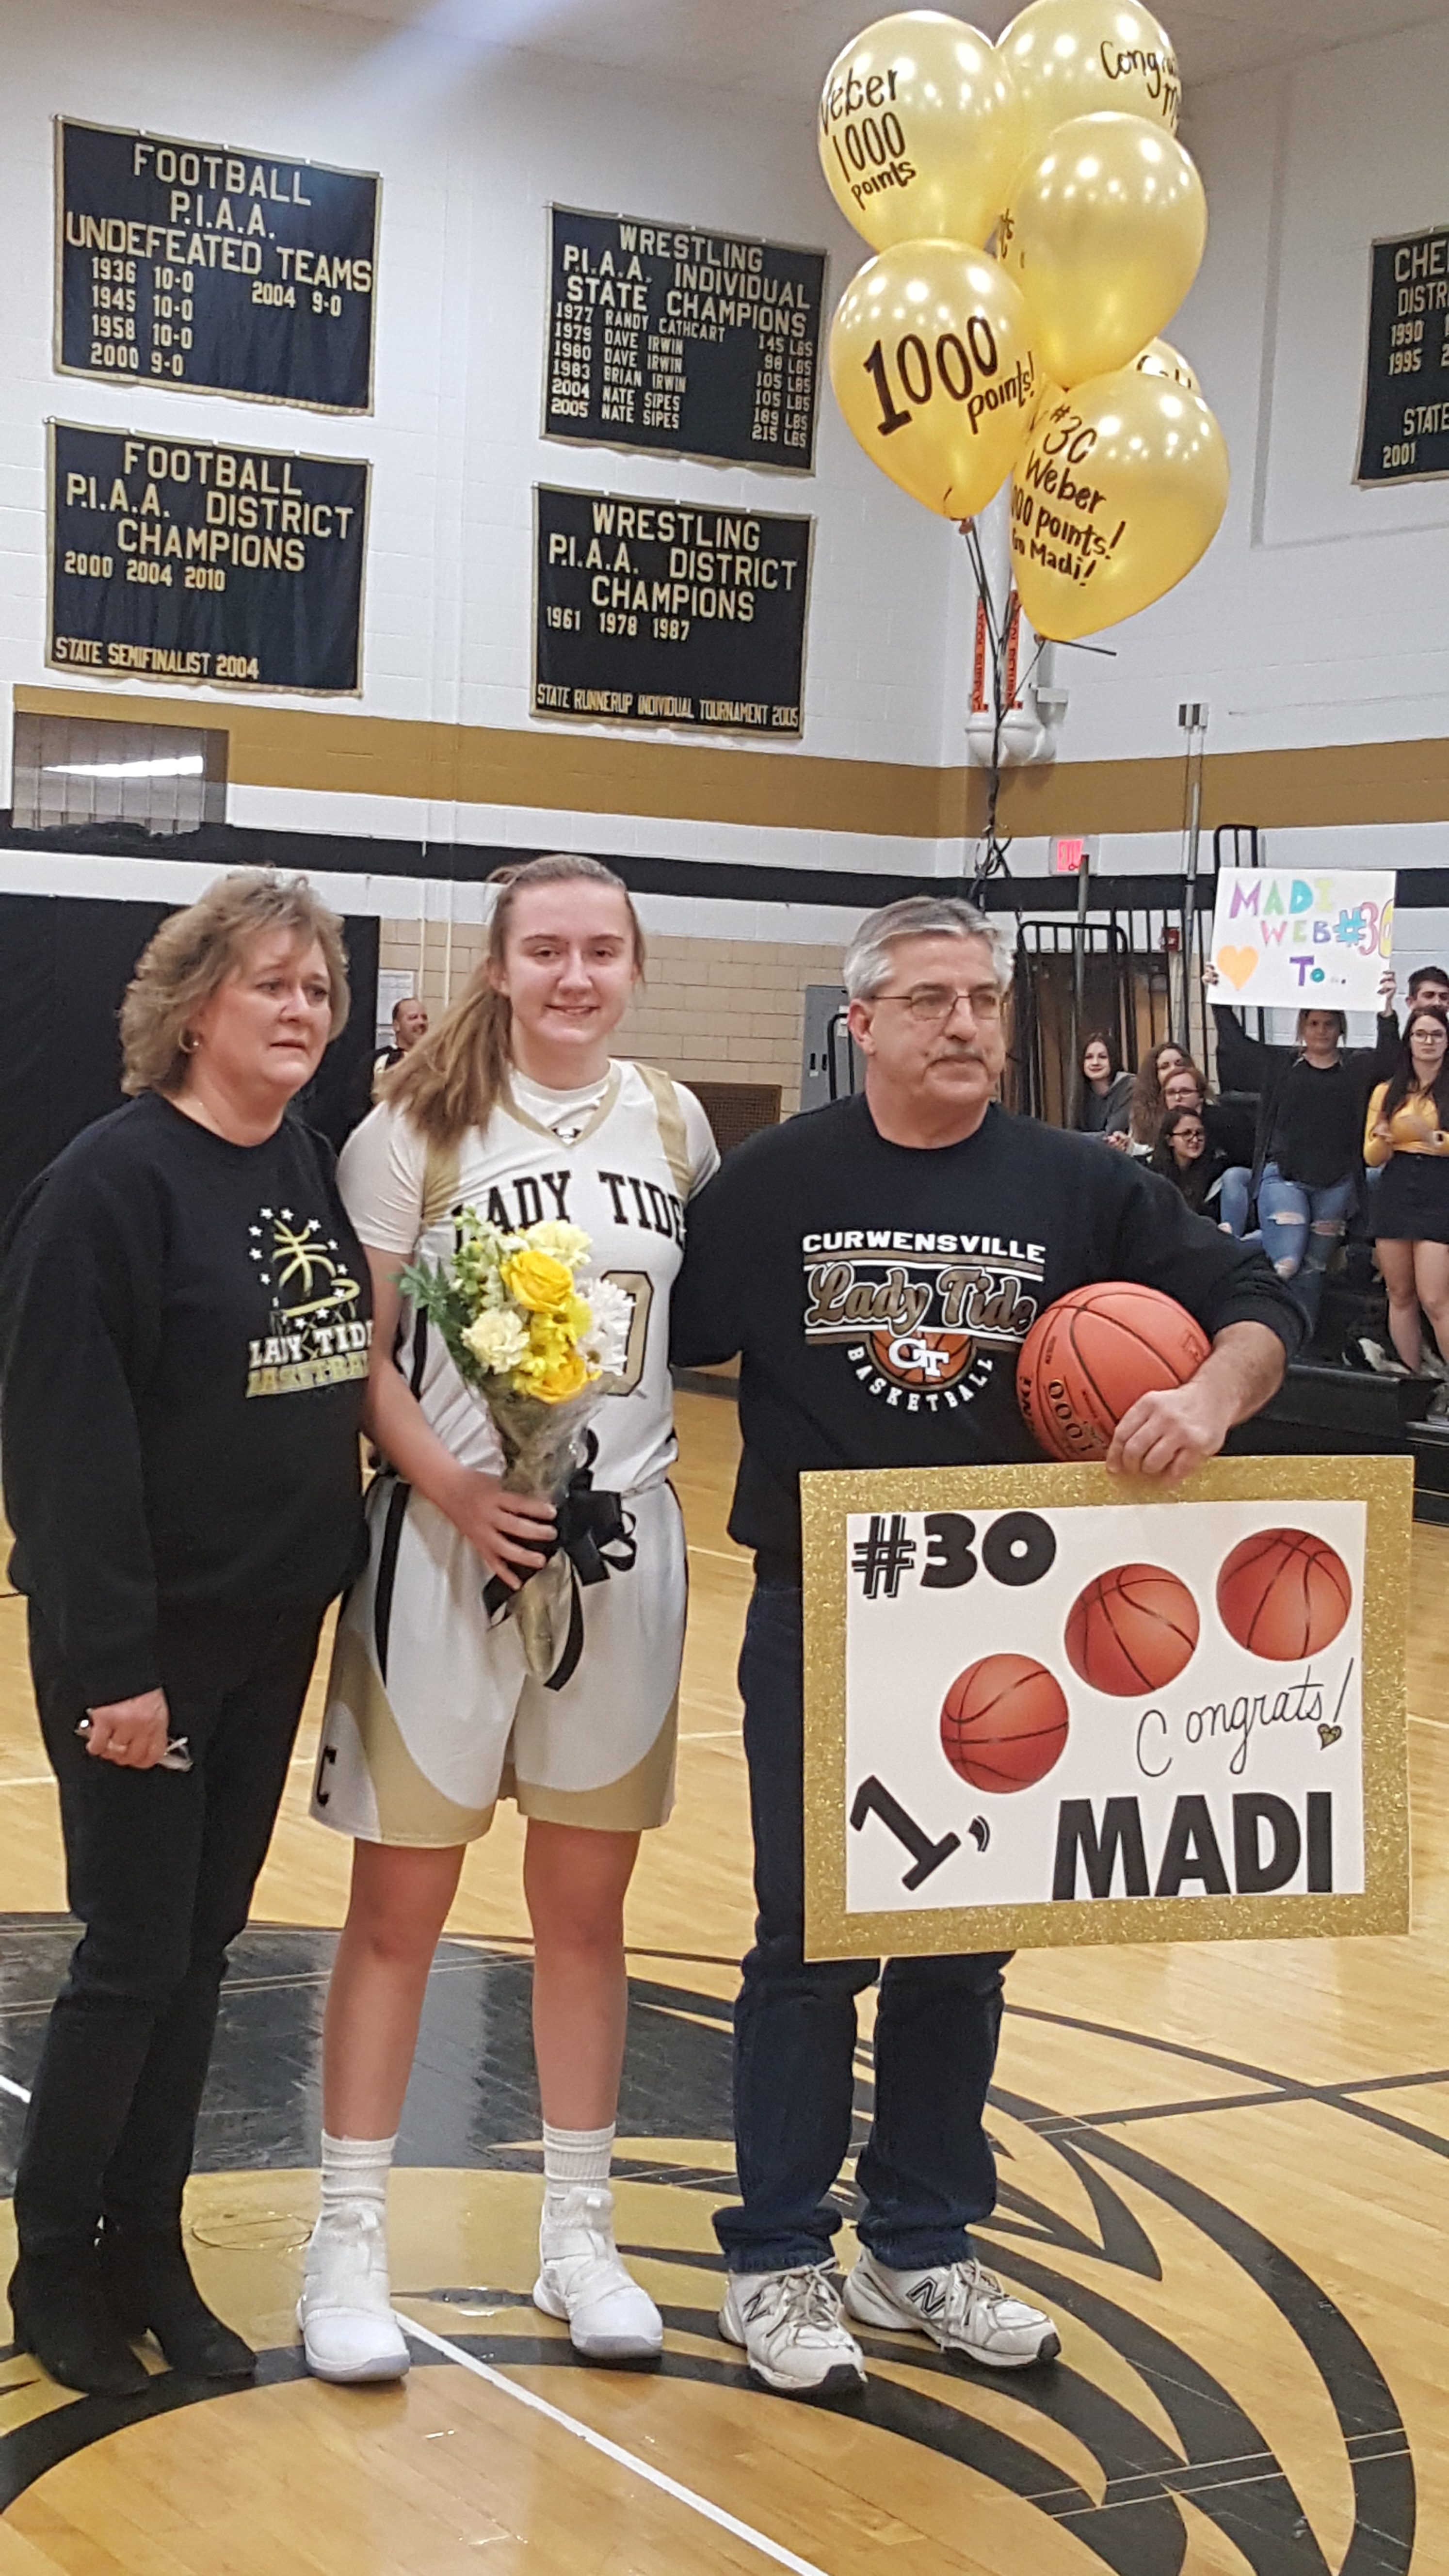 Senior Madi Weber scored her 100th career point in the win (Phoo by Dustin Parks)